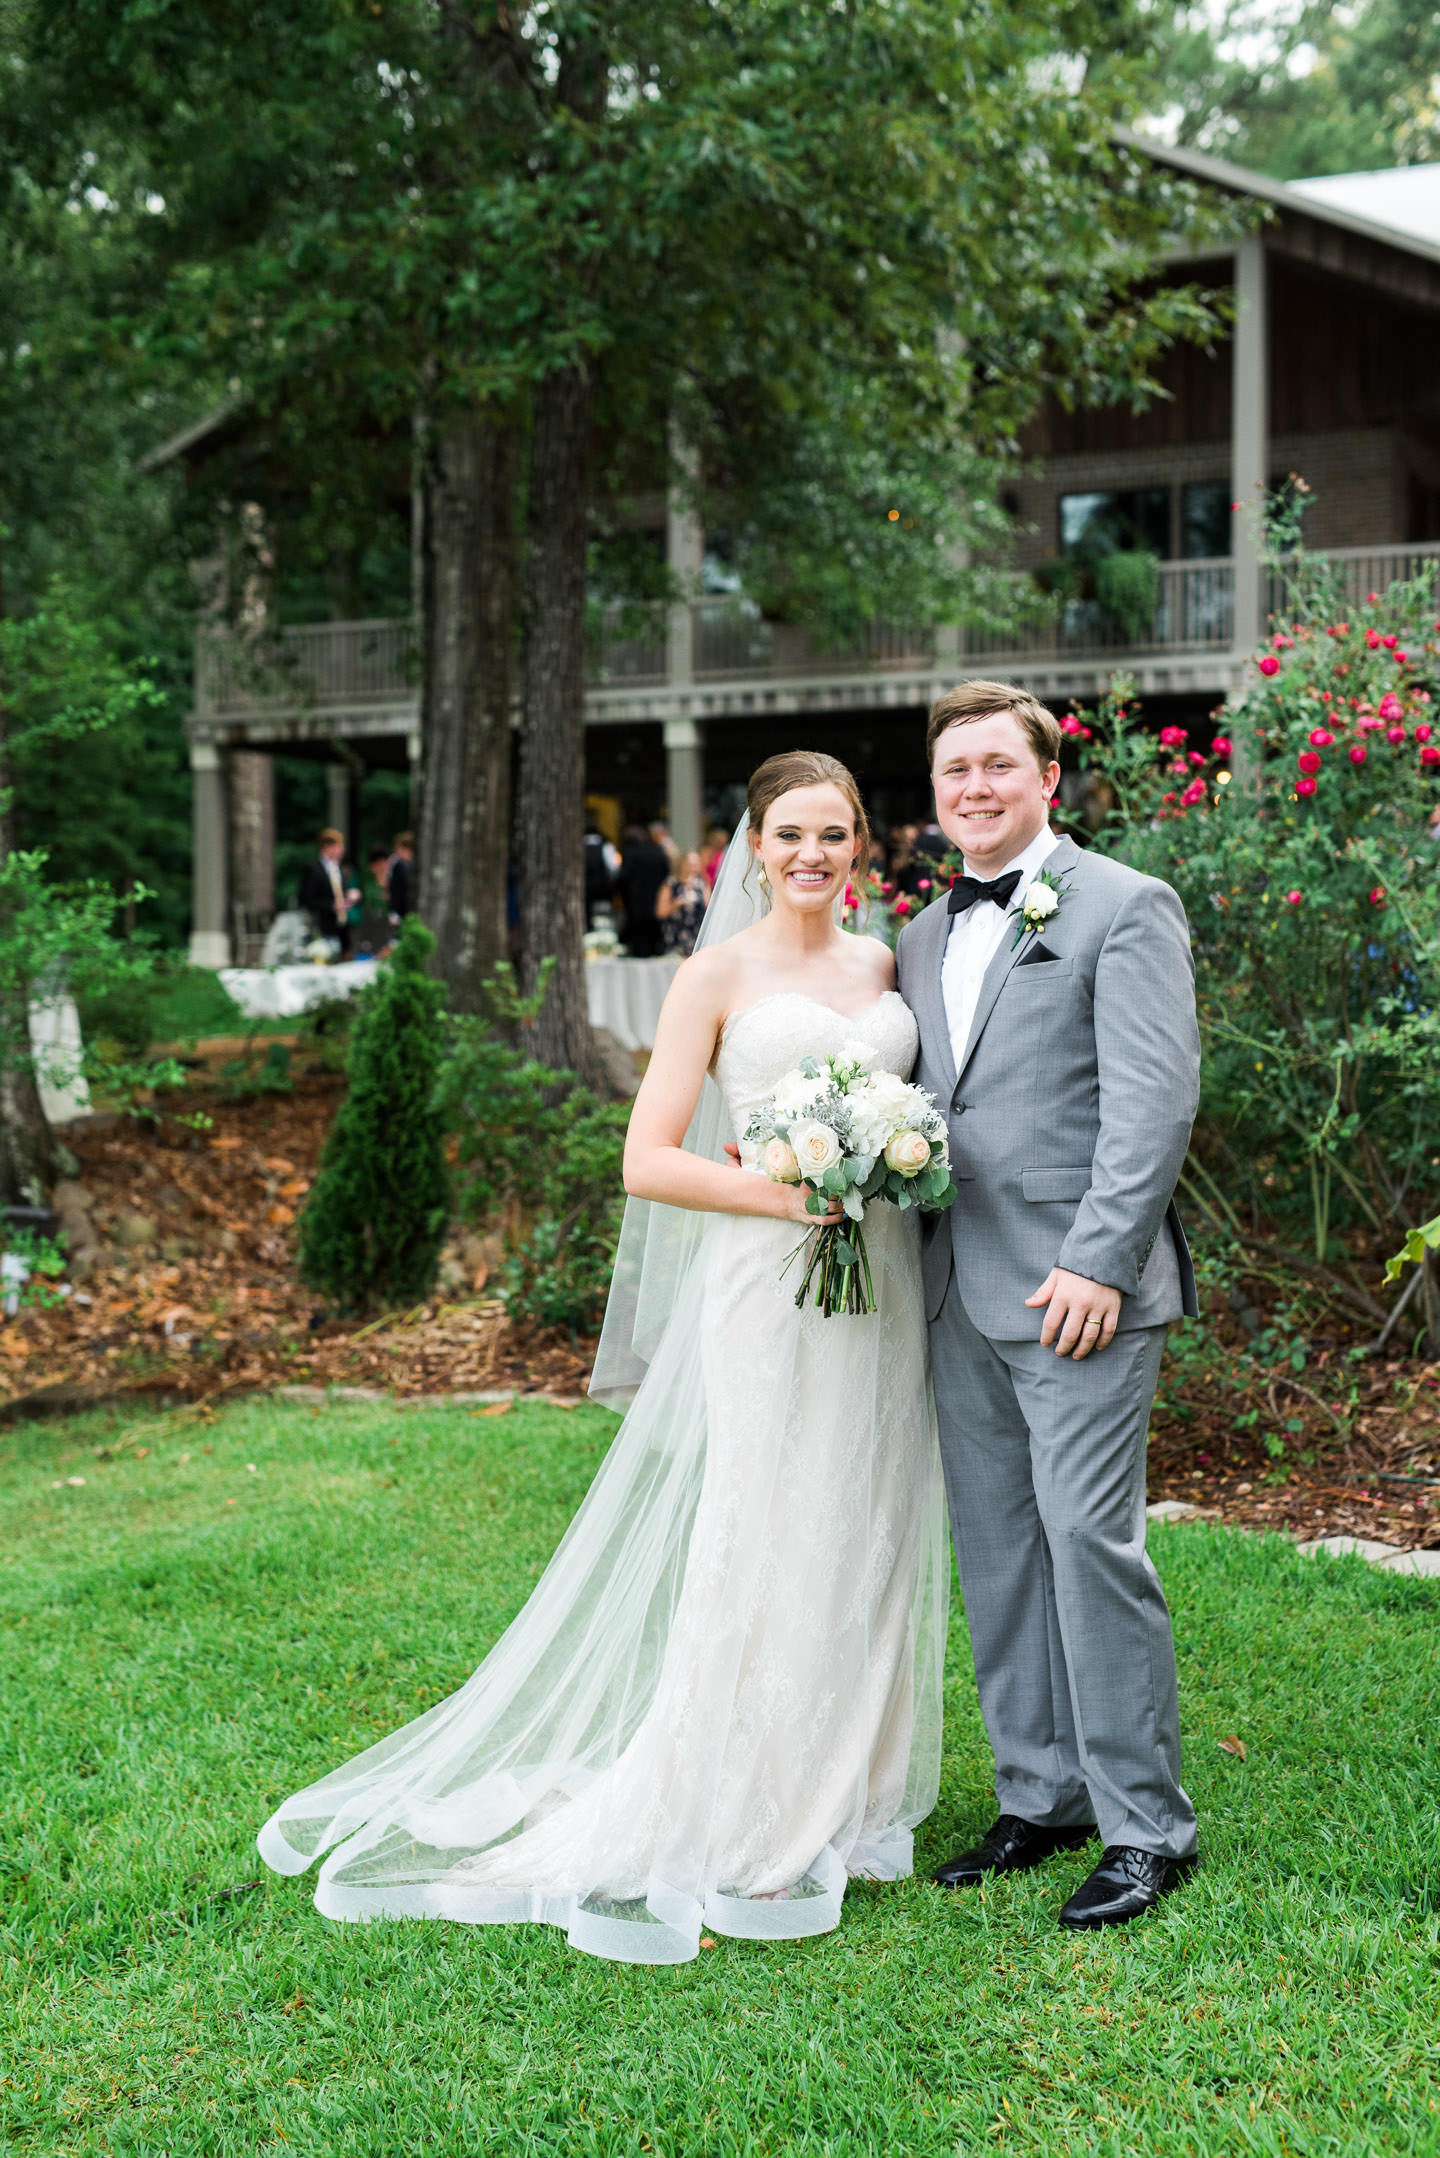 Jackson, Mississippi bride and groom smile for a portrait following their outdoor southern wedding